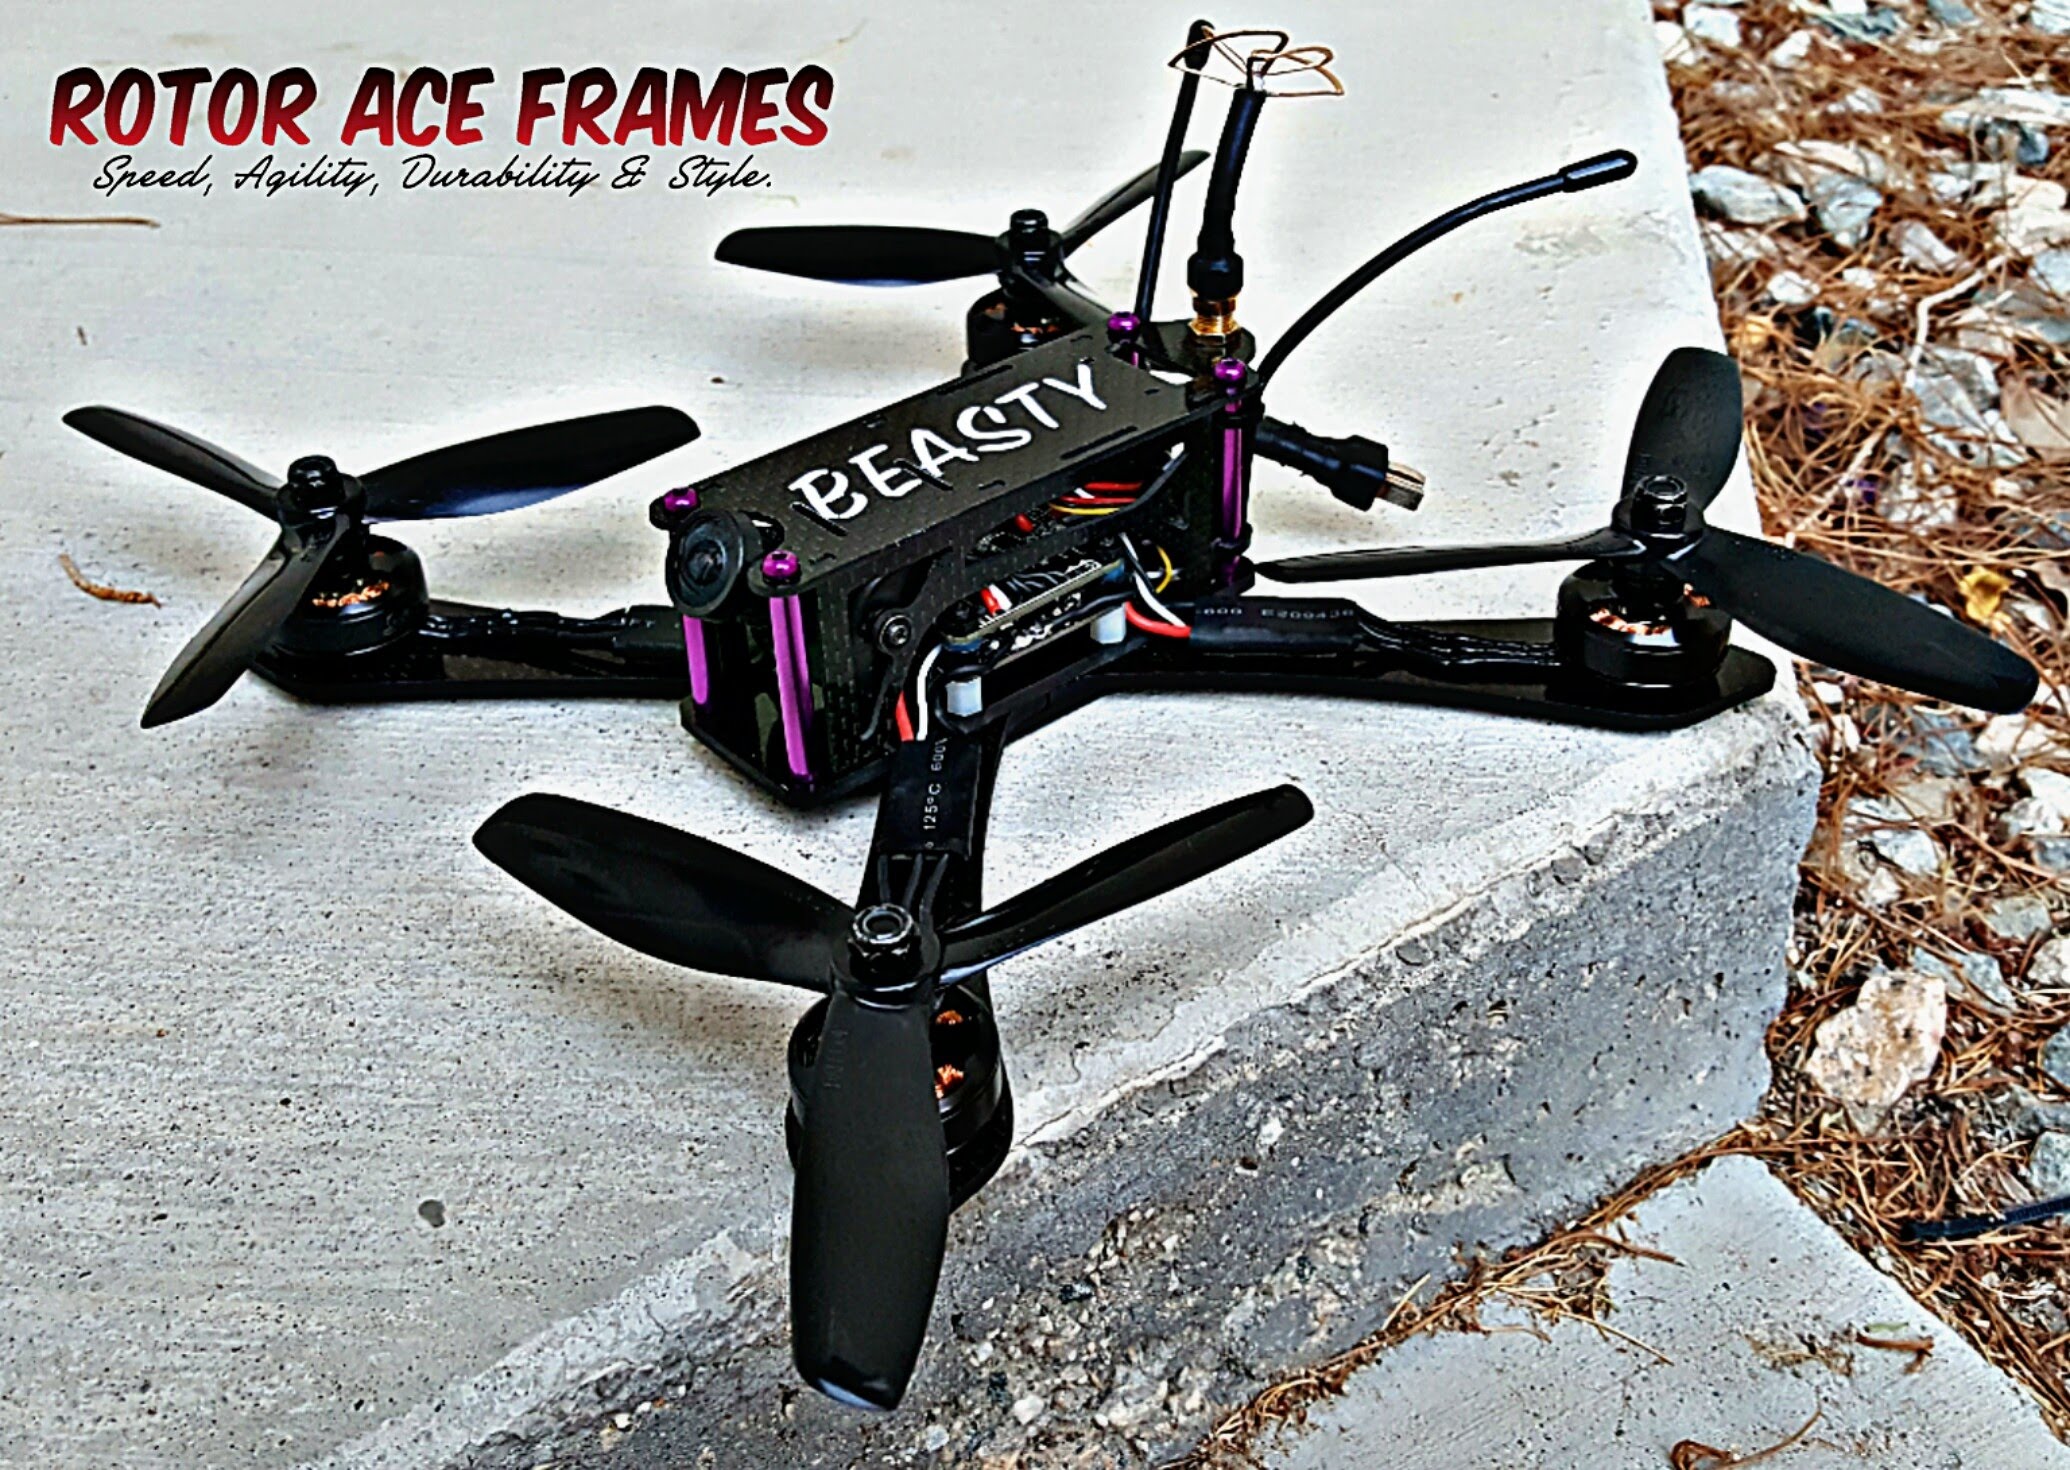 Beasty FPV X Frame Freestyle | Drone Racing Frames | Rotor Ace Frames